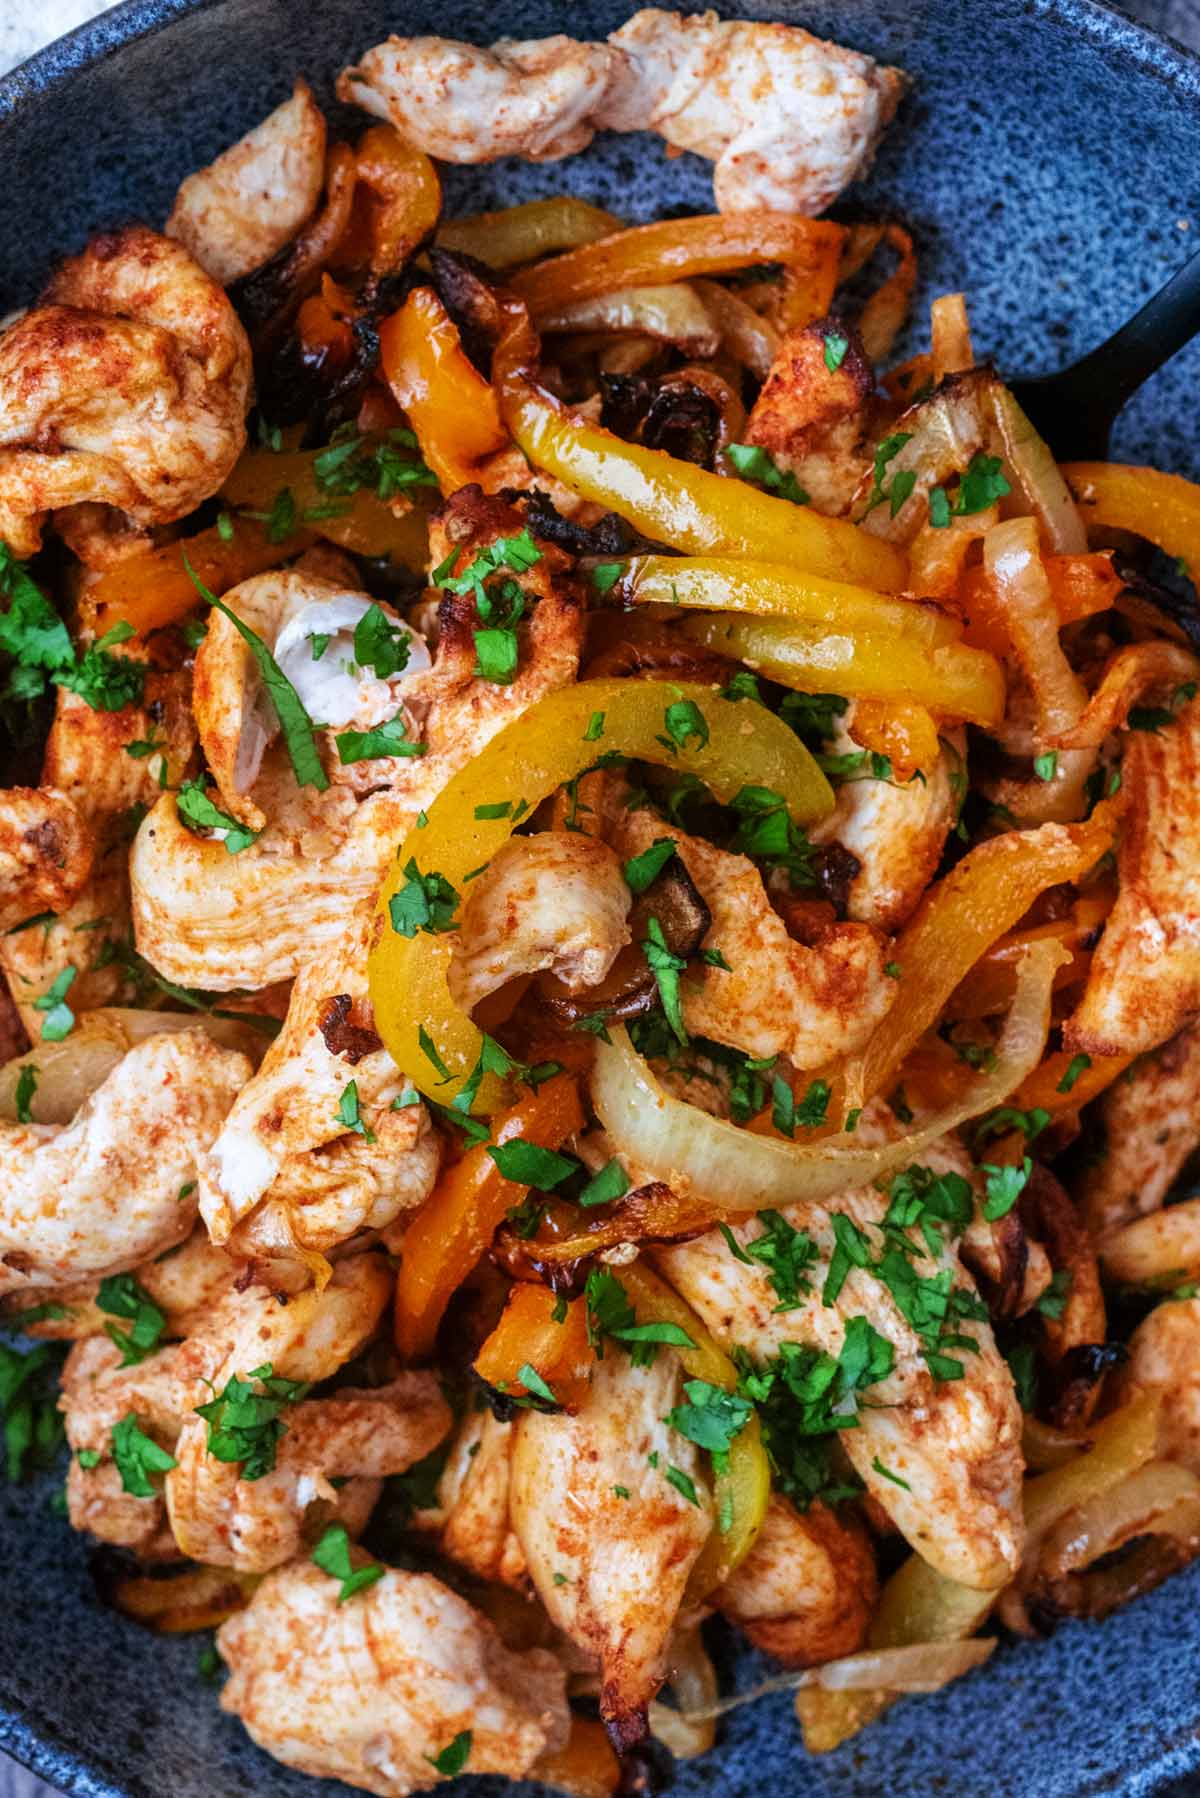 Cooked chicken, onions and peppers in a Mexican seasoning.